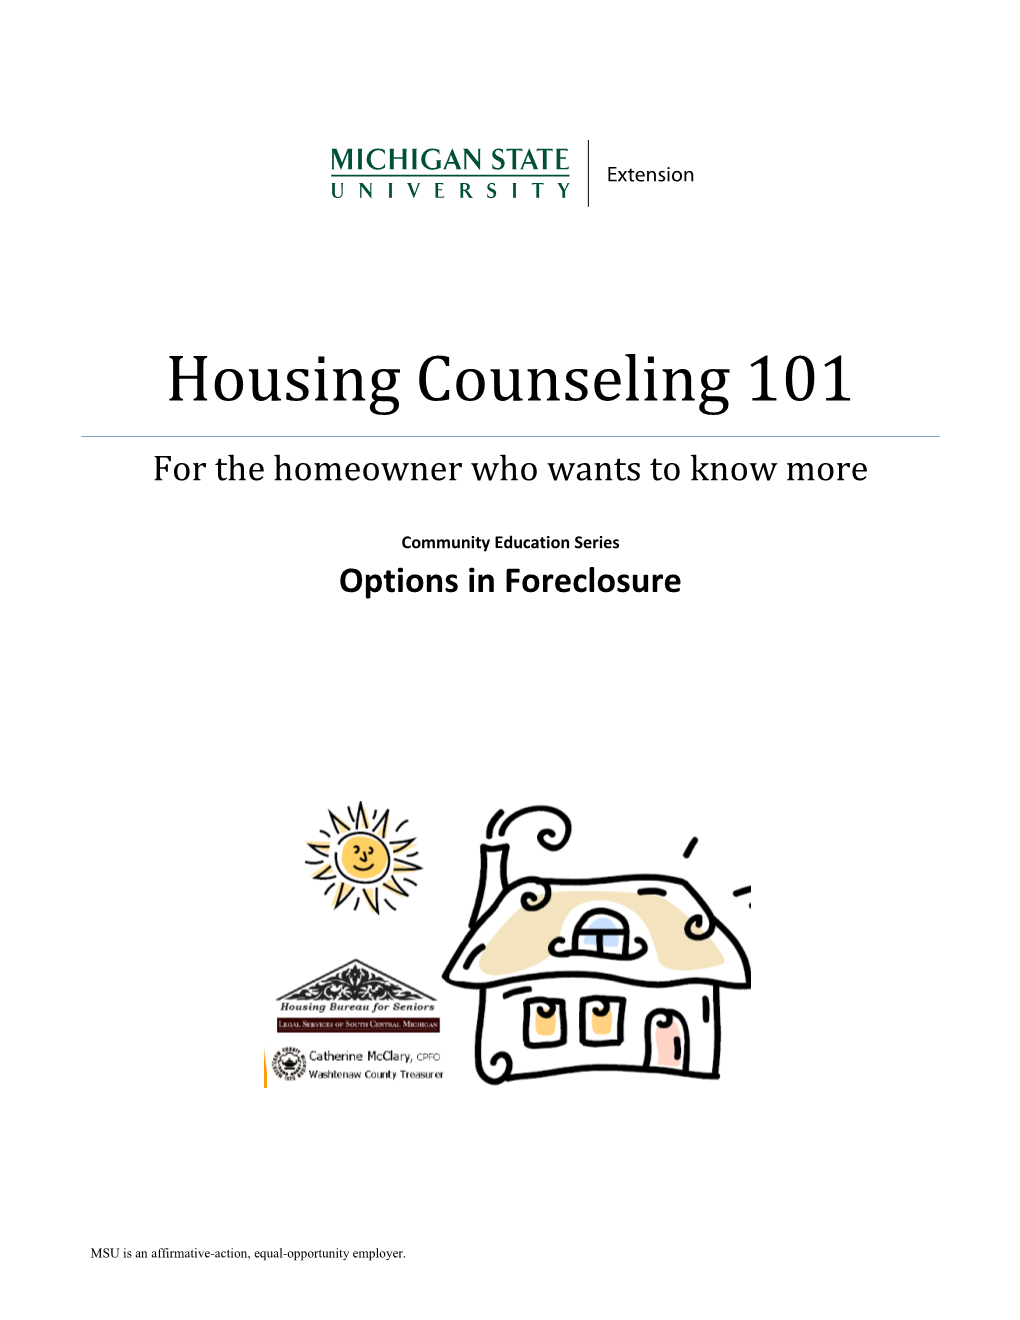 Housing Counseling 101 for the Homeowner Who Wants to Know More